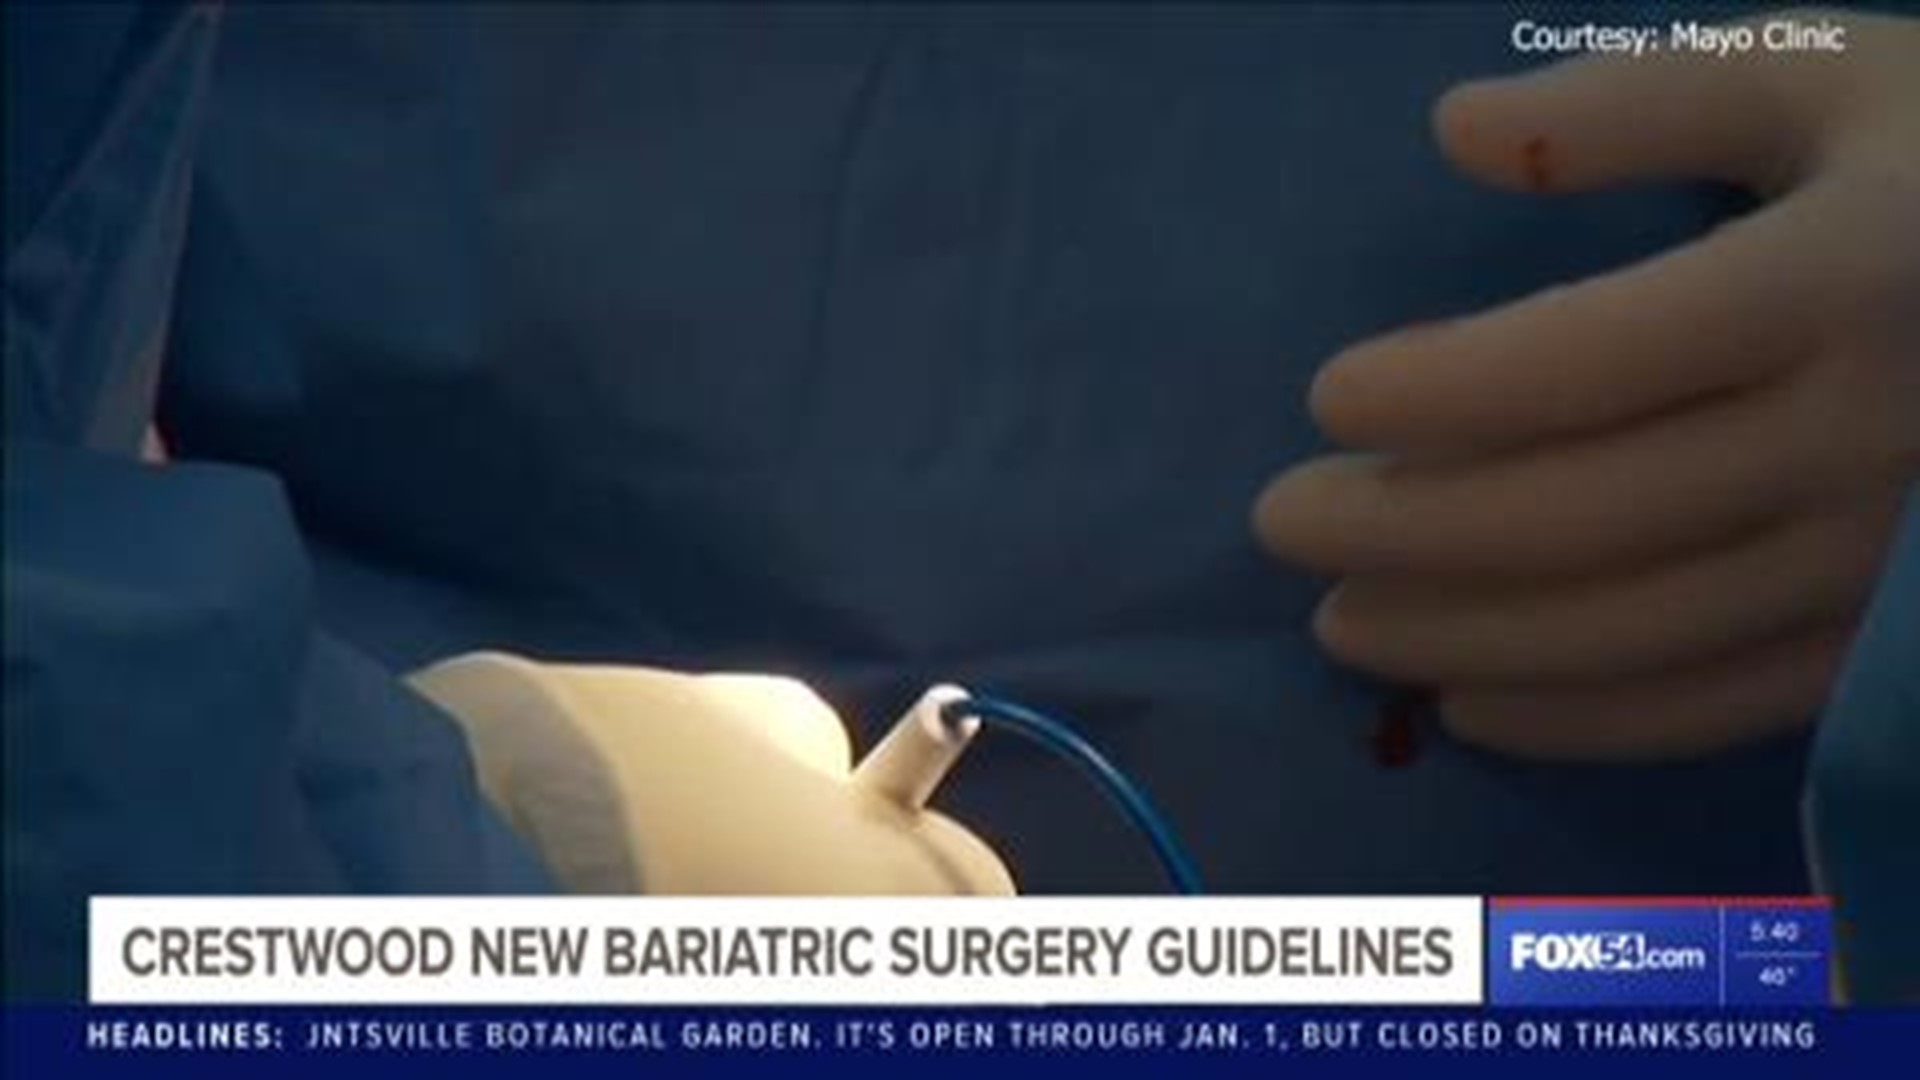 Millions more may be eligible for bariatric surgery under new guidelines.